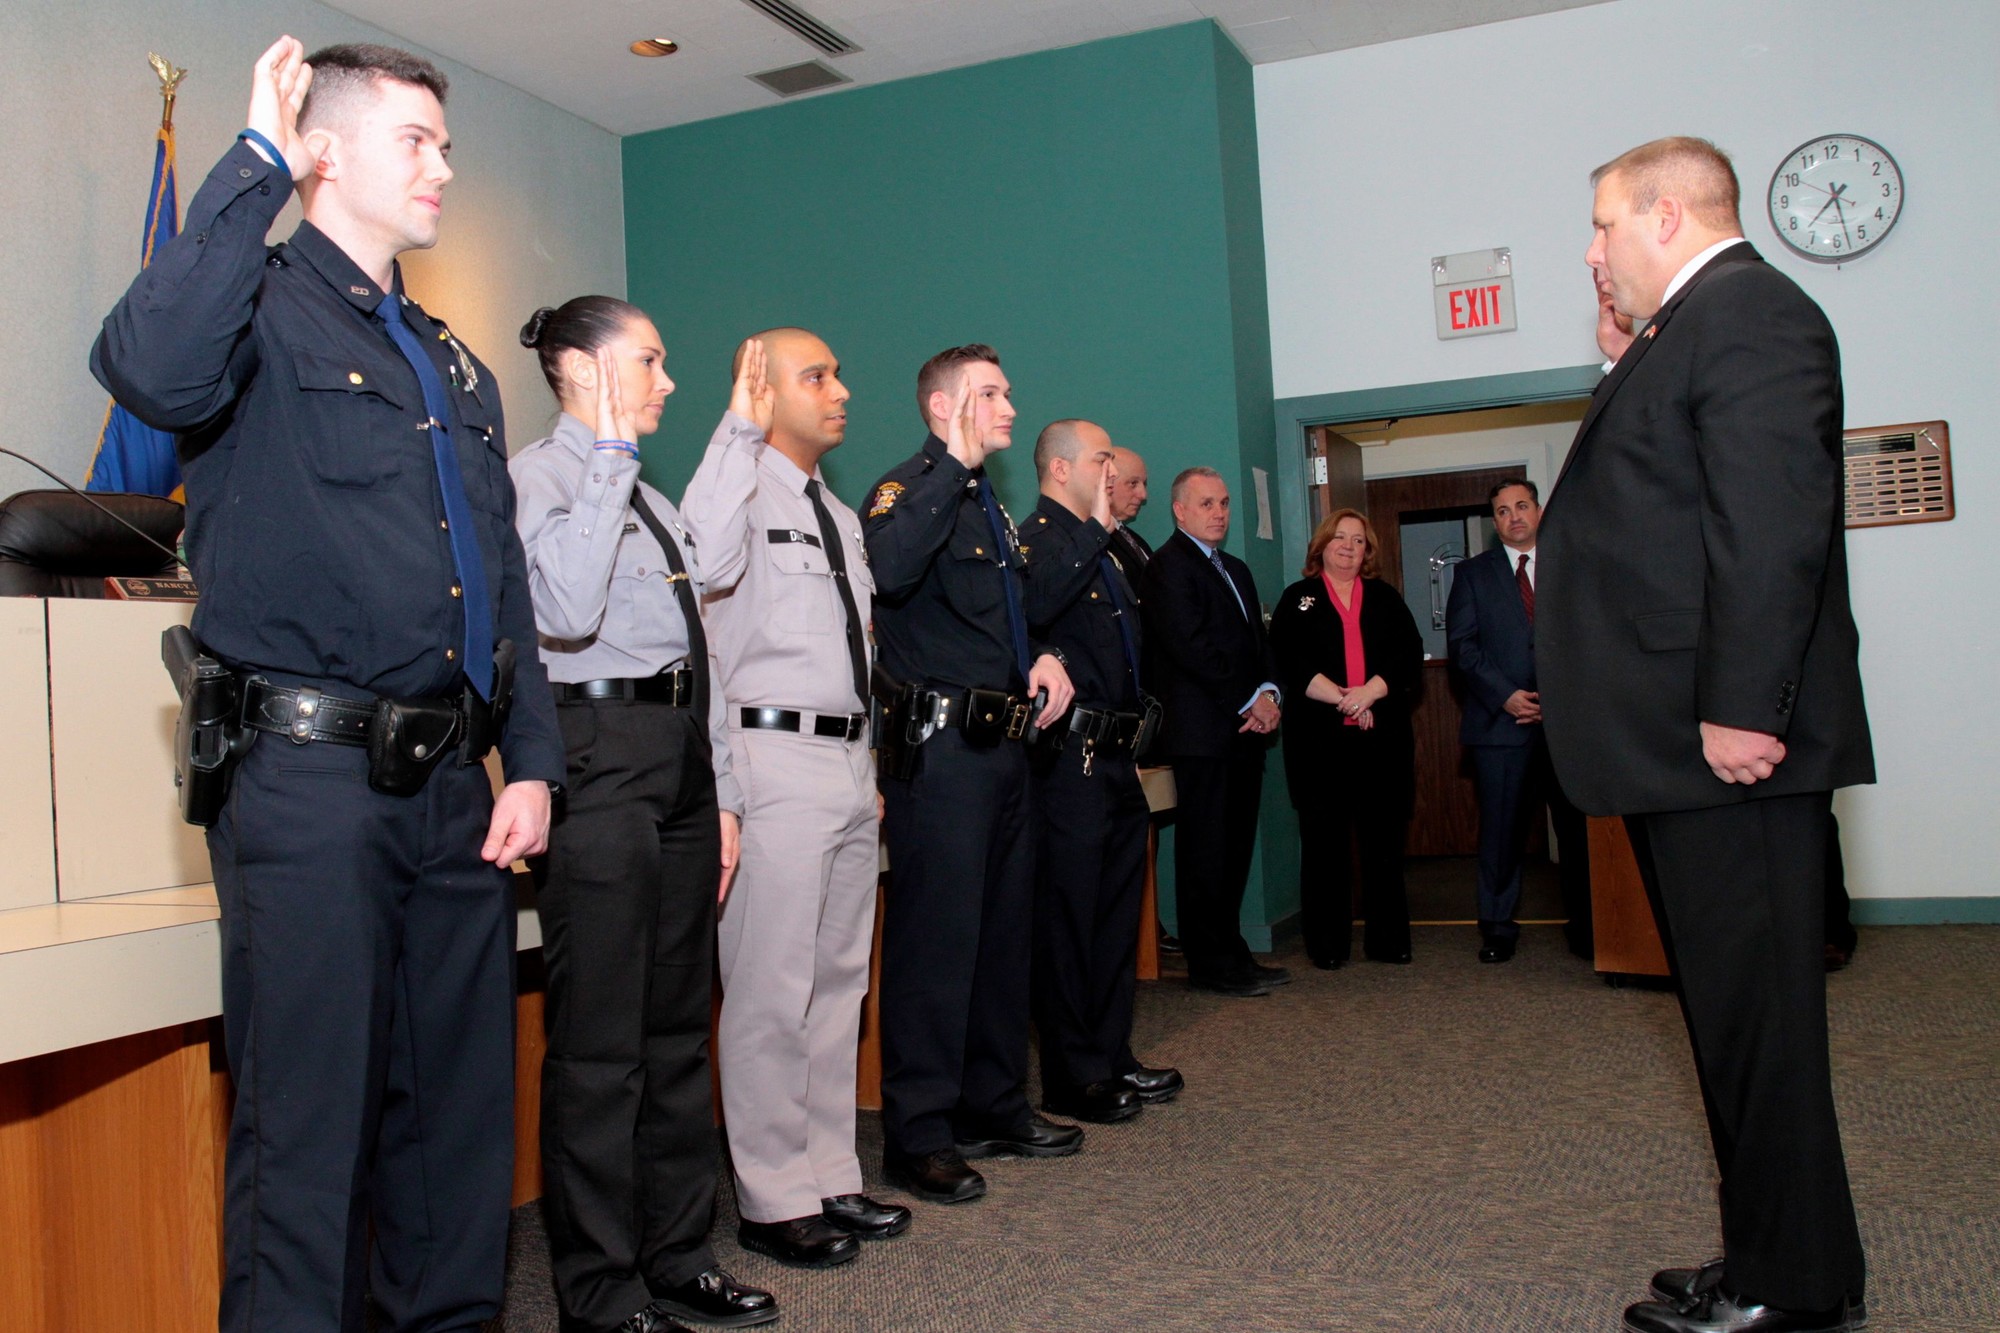 Police Commissioner Charles Gennario, right, swore in new officers, from left, Michael Farrell, Stefanie Balos, Jerremy Diaz, Nicholas Bamonte and Kyle Coppola as the village’s Board of Trustees looked on.